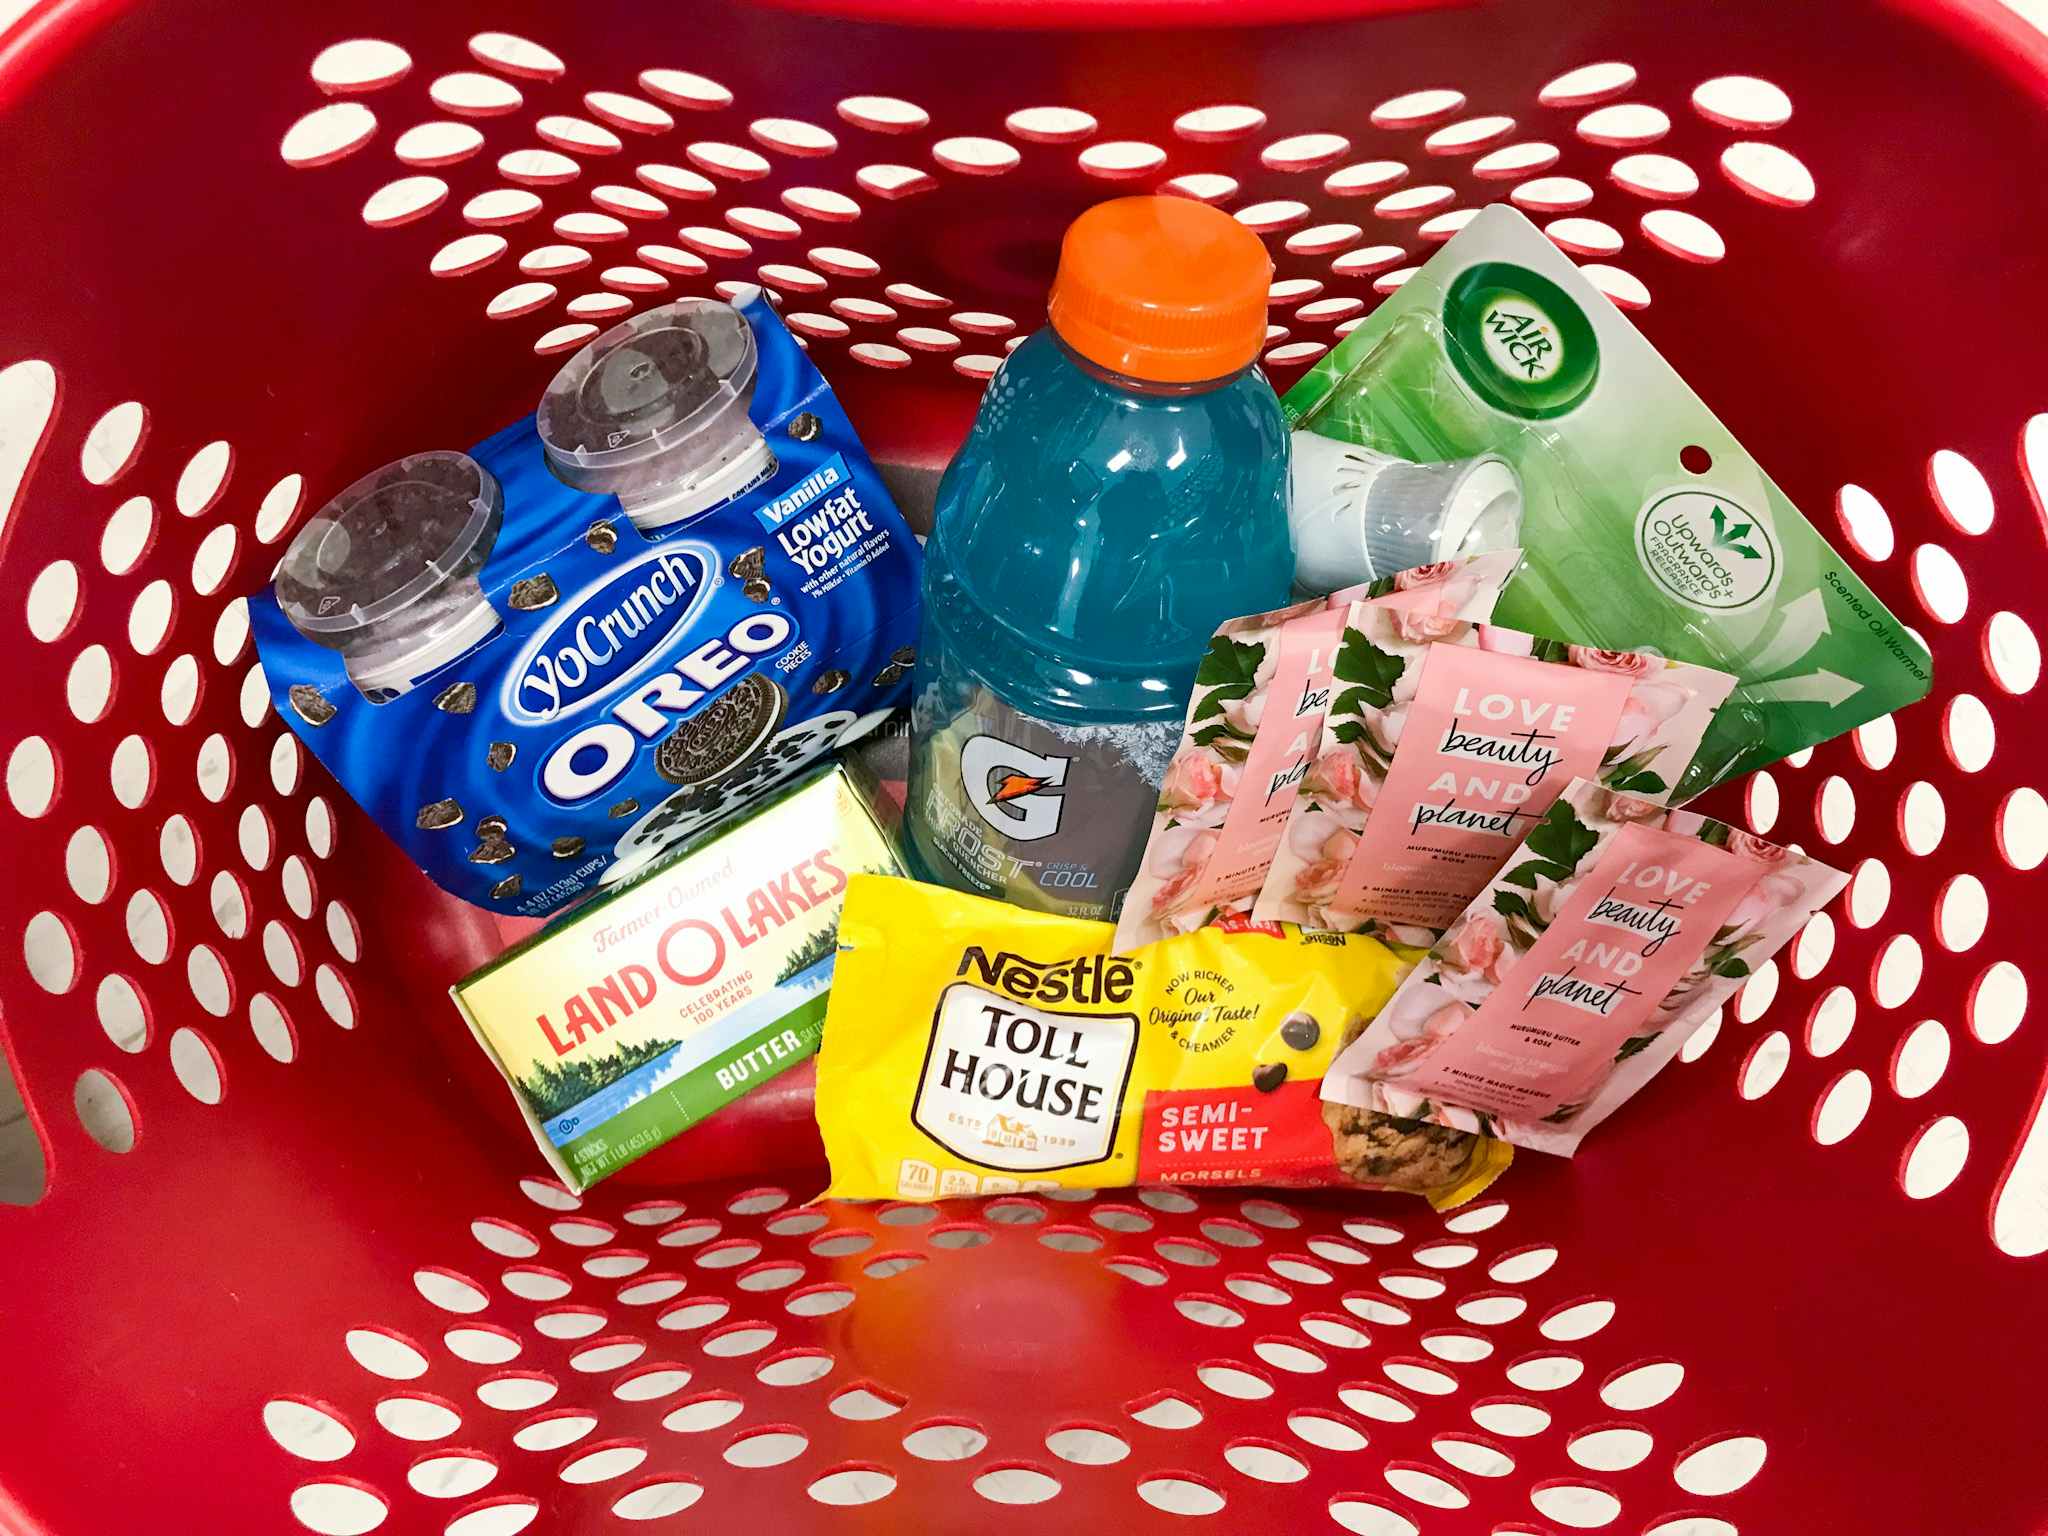 nestle land o lakes gatorade yocrunch air wick and love beauty & planet in a target basket